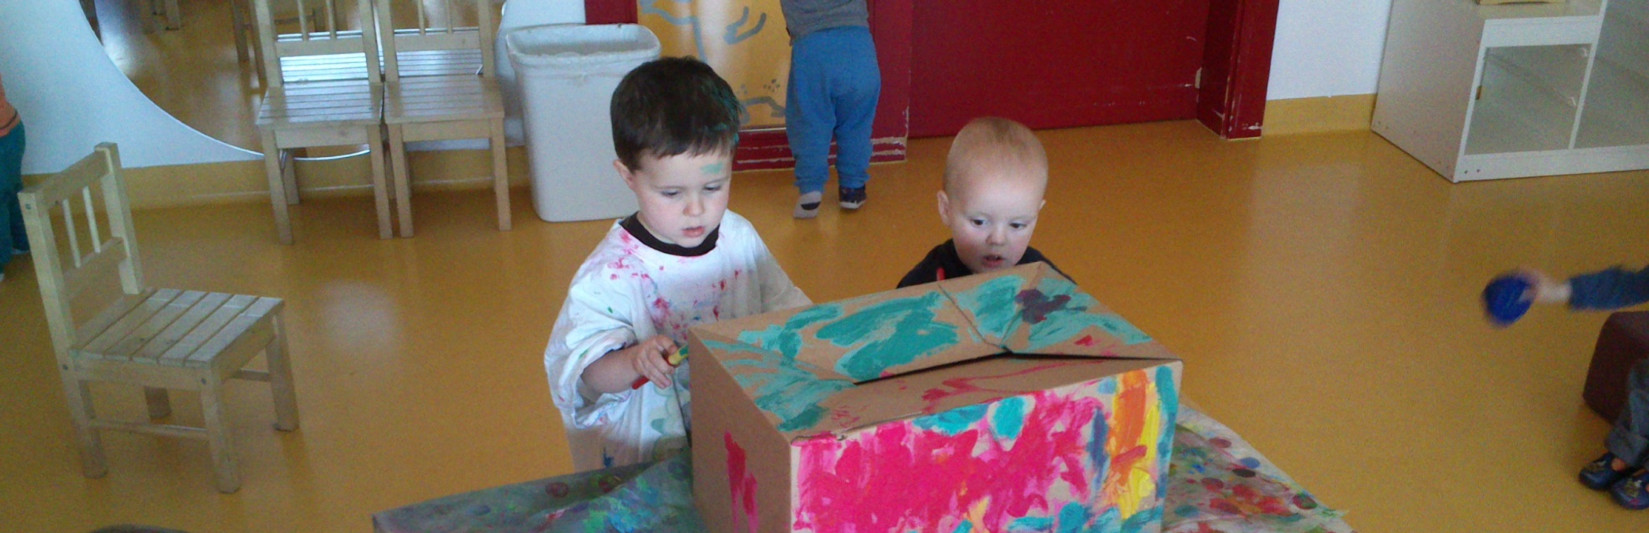 <div class="naslov"> <h1>Painting
</h1> <p class="p-slid">box, table,floor, hair and in the end we make a car!</p> </div>